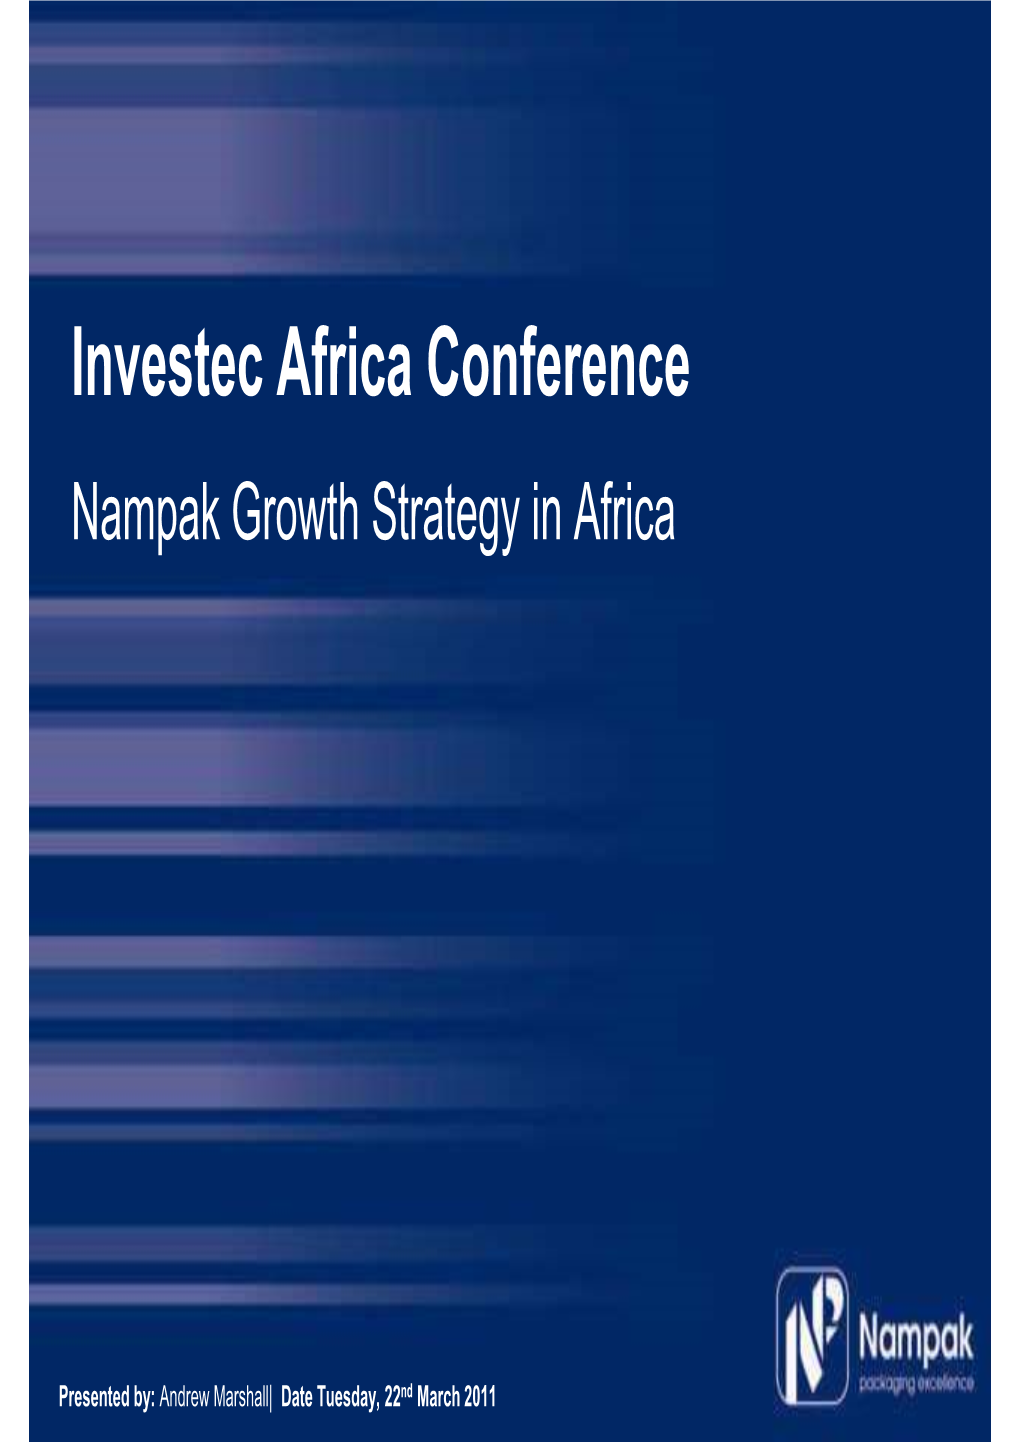 Investec Africa Conference Nampak Growth Strategy in Africa